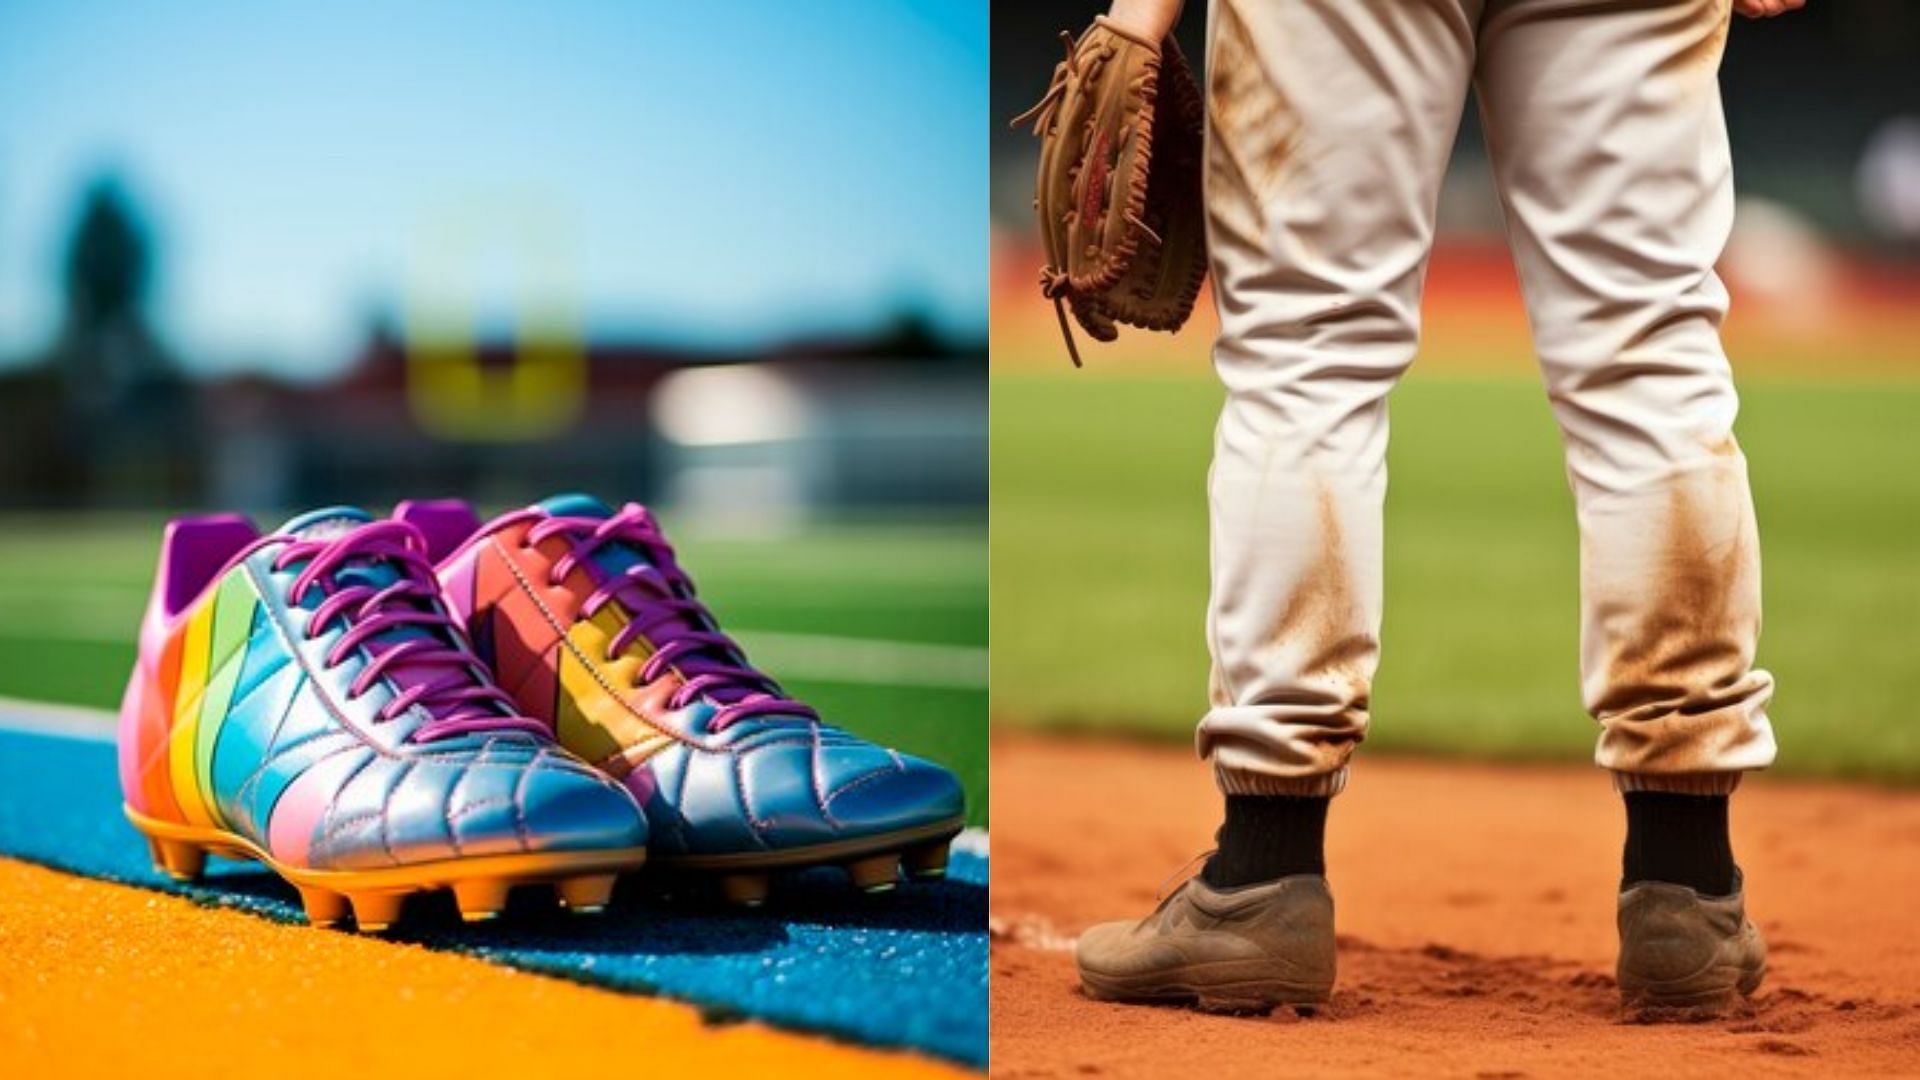 Soccer cleats vs baseball cleats: Key differences and uses